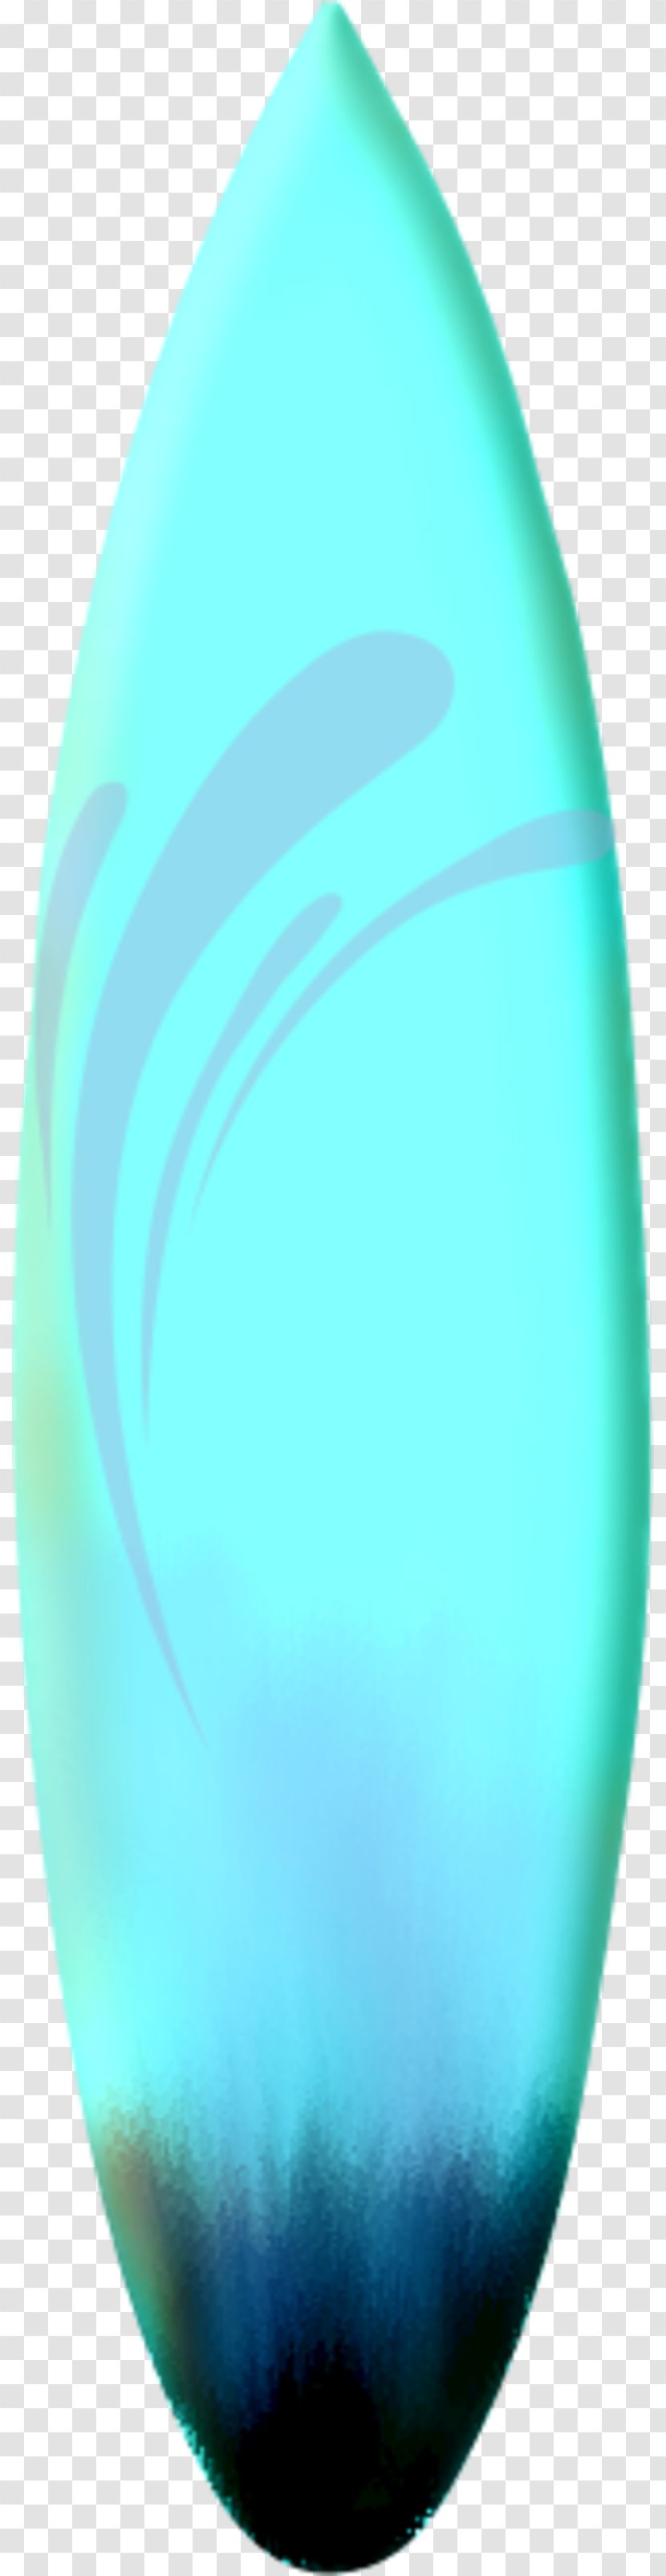 Turquoise Teal Circle Sphere Oval - Microsoft Azure - Surfing Transparent PNG